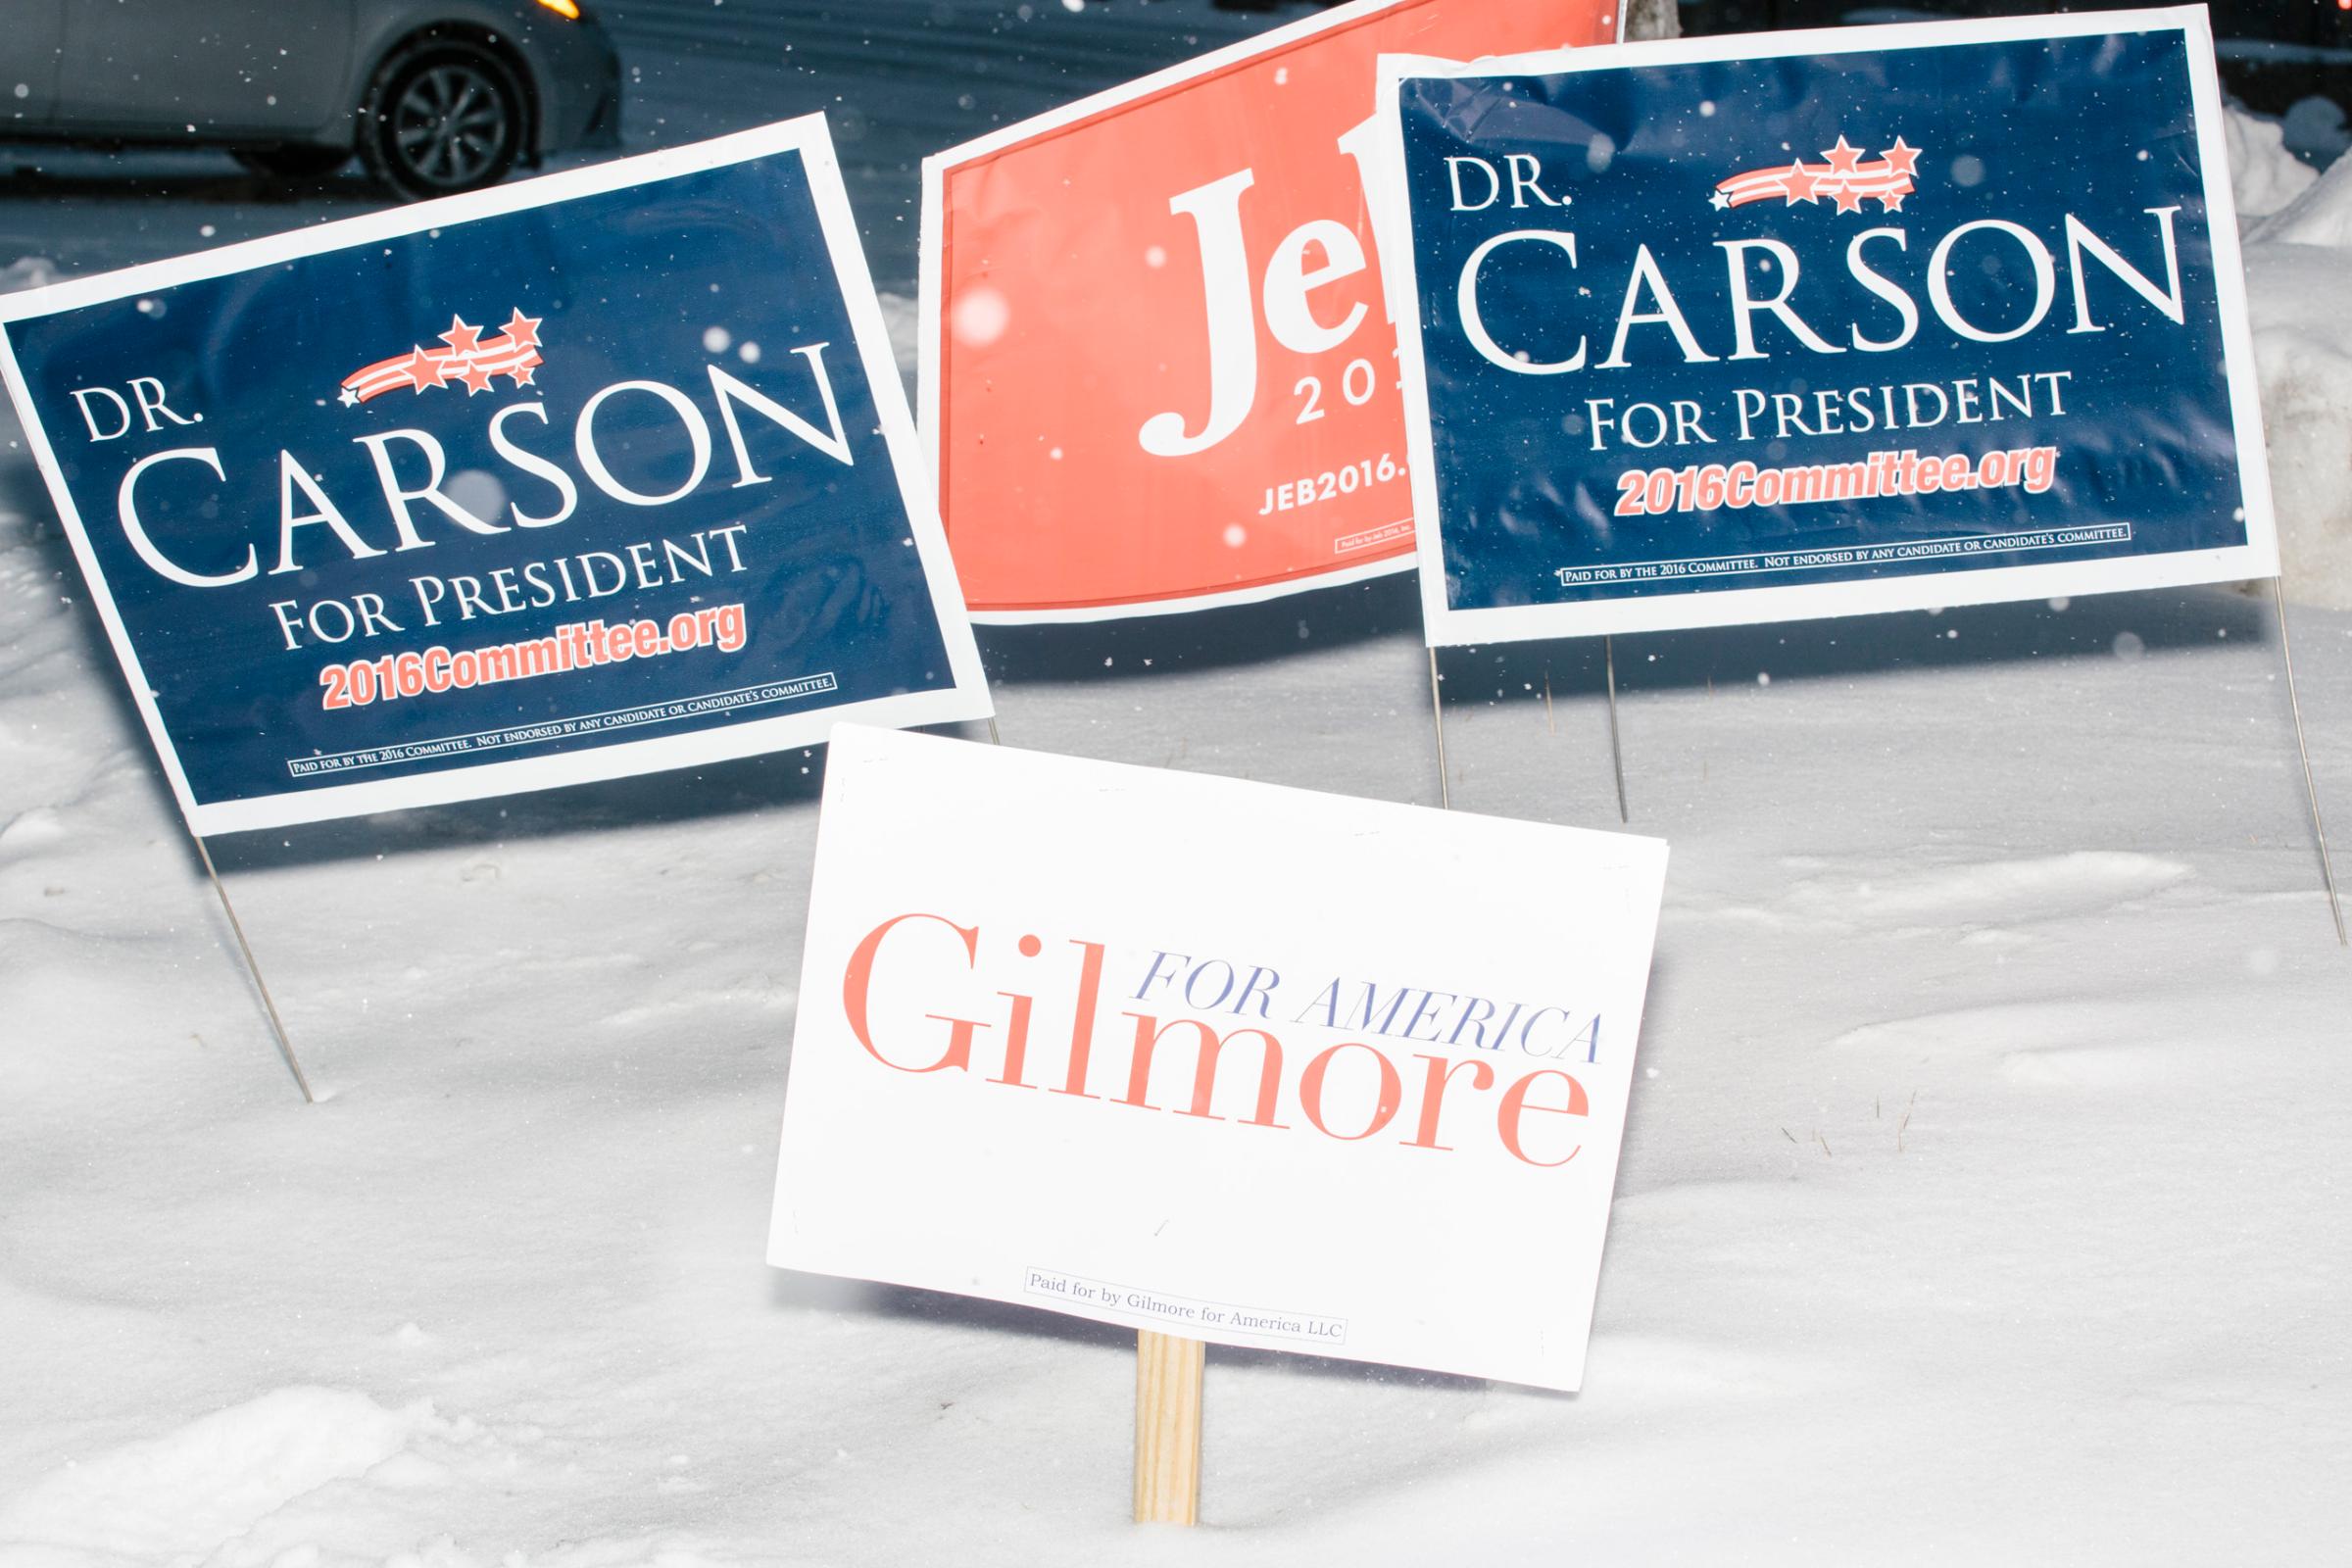 A campaign sign for former Virginia governor and Republican presidential candidate Jim Gilmore stands in the snow among those of other Republican presidential candidates on Granite Street in Manchester, New Hampshire, on Mon., Feb. 8, 2016. Gilmore finished in last place among major Republican candidates still in the race with a total of 150 votes.